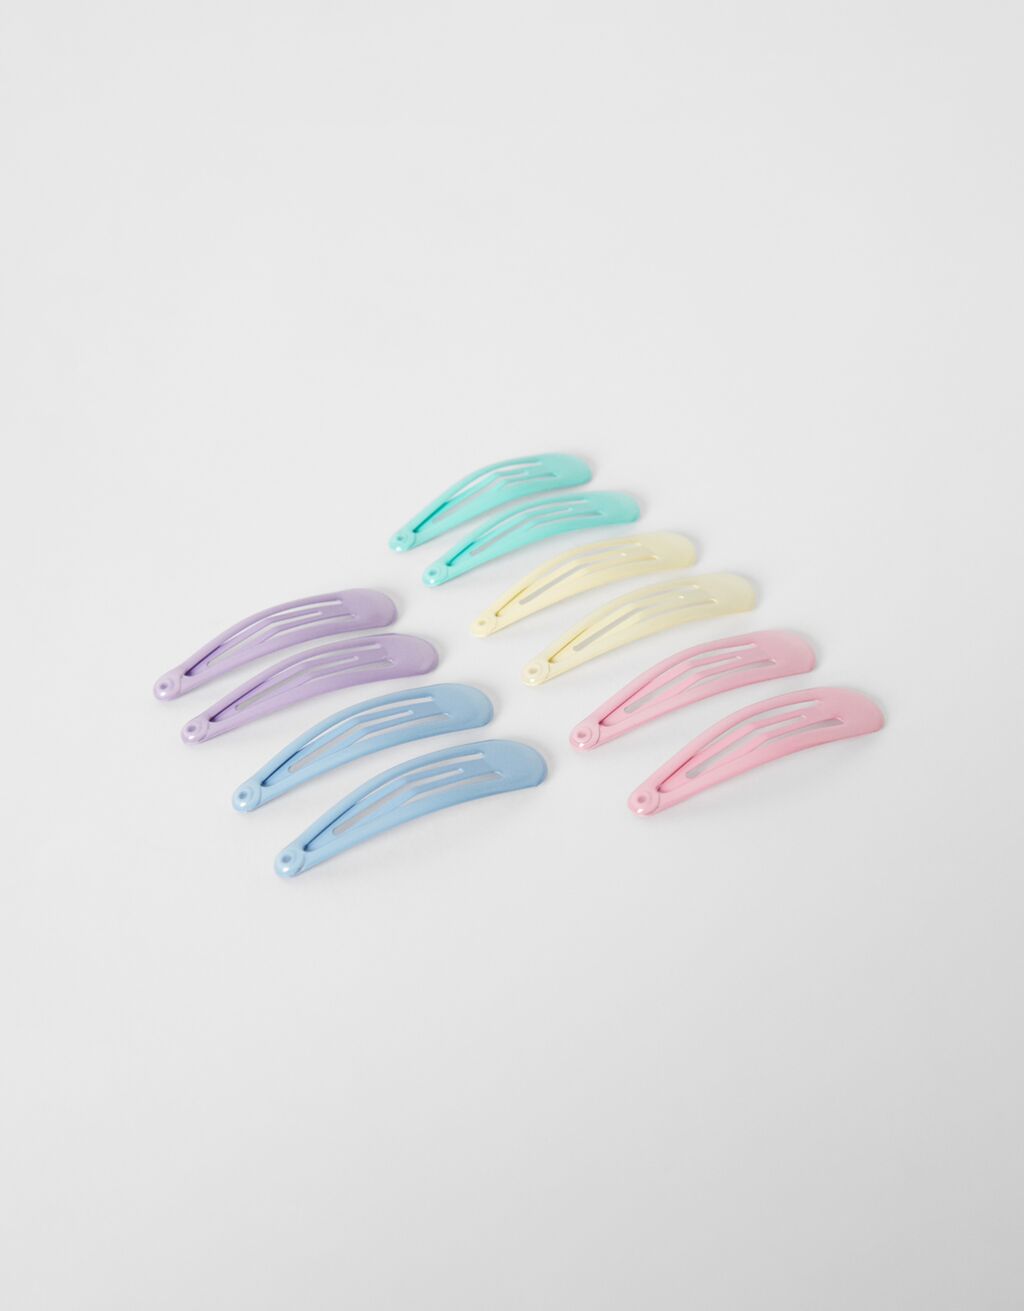 Pack of 10 colored hair clips